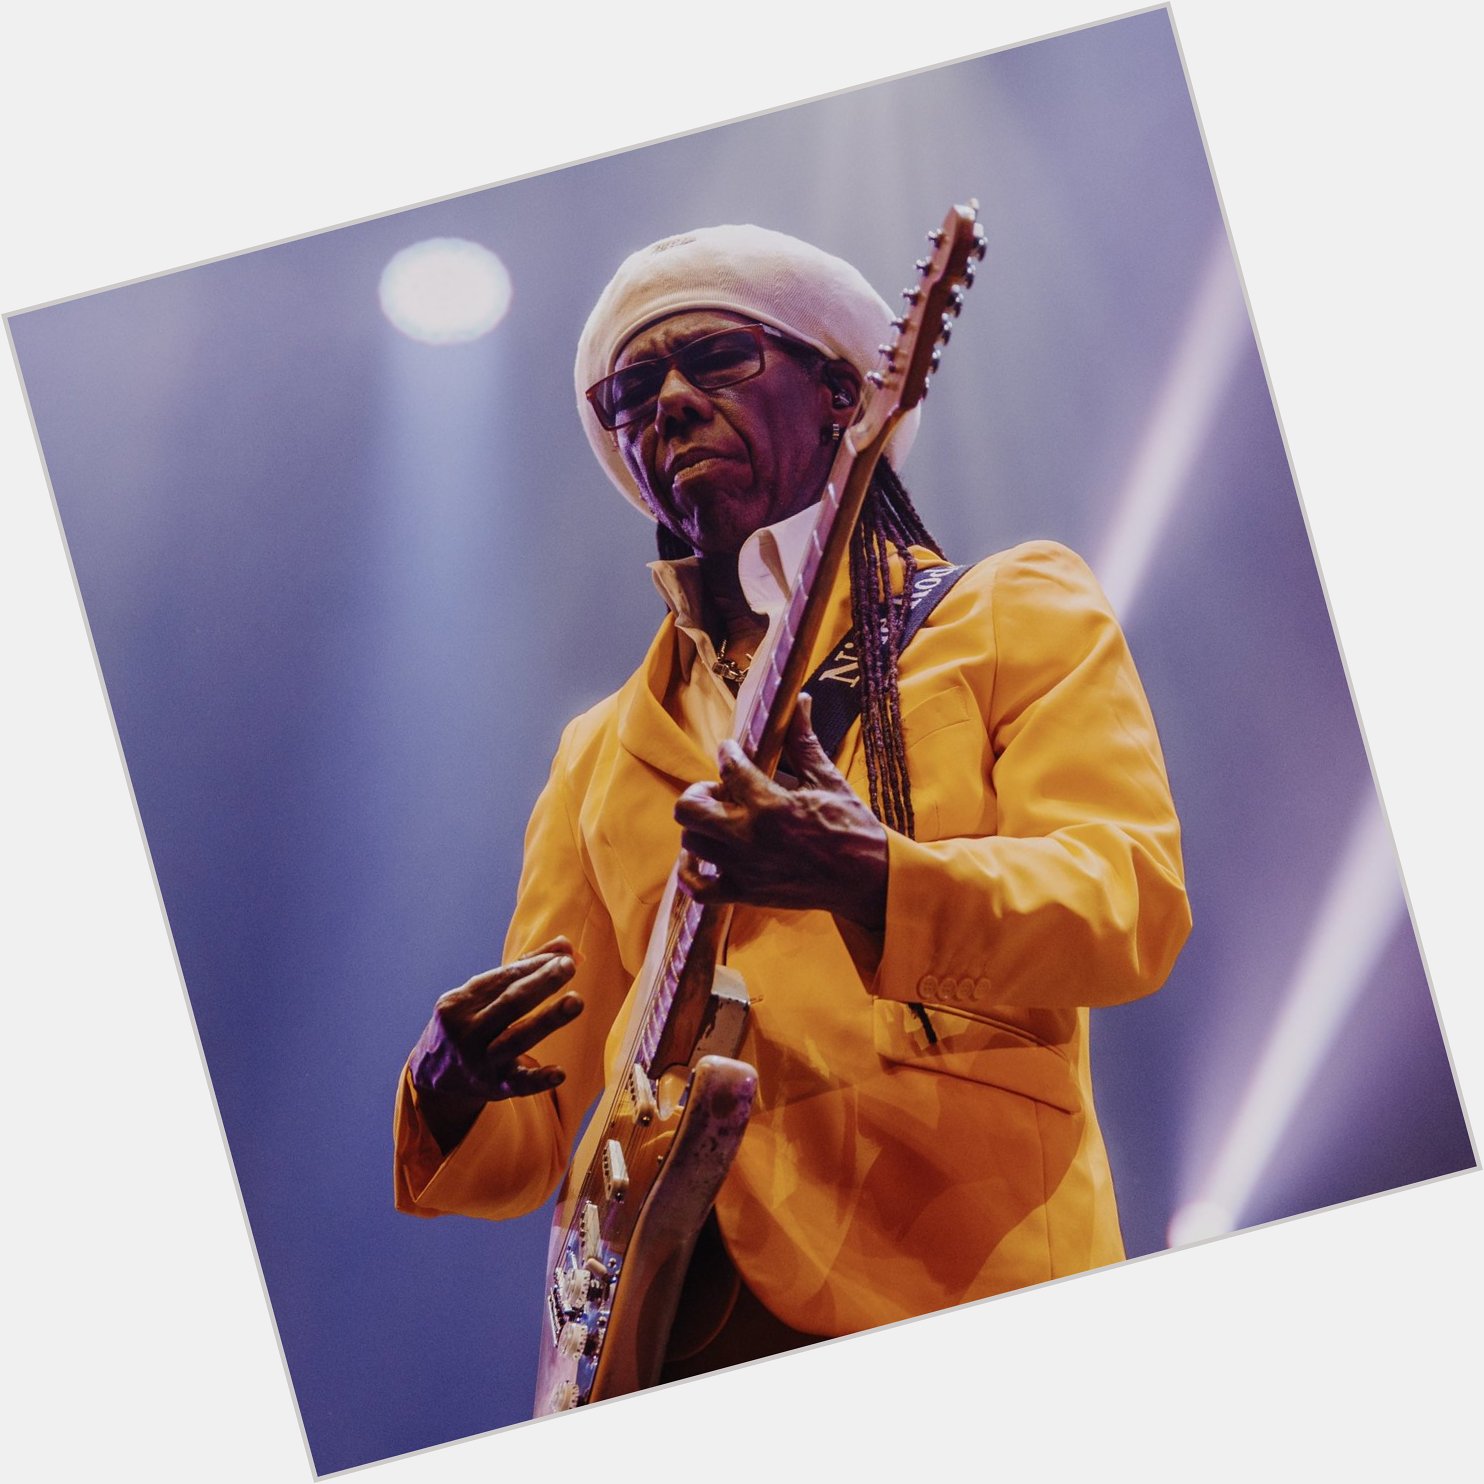 Nile Rodgers is jarig Happy birthday, Mr. Rodgers. Looking forward to welcome you next year at Soestdijk Palace 